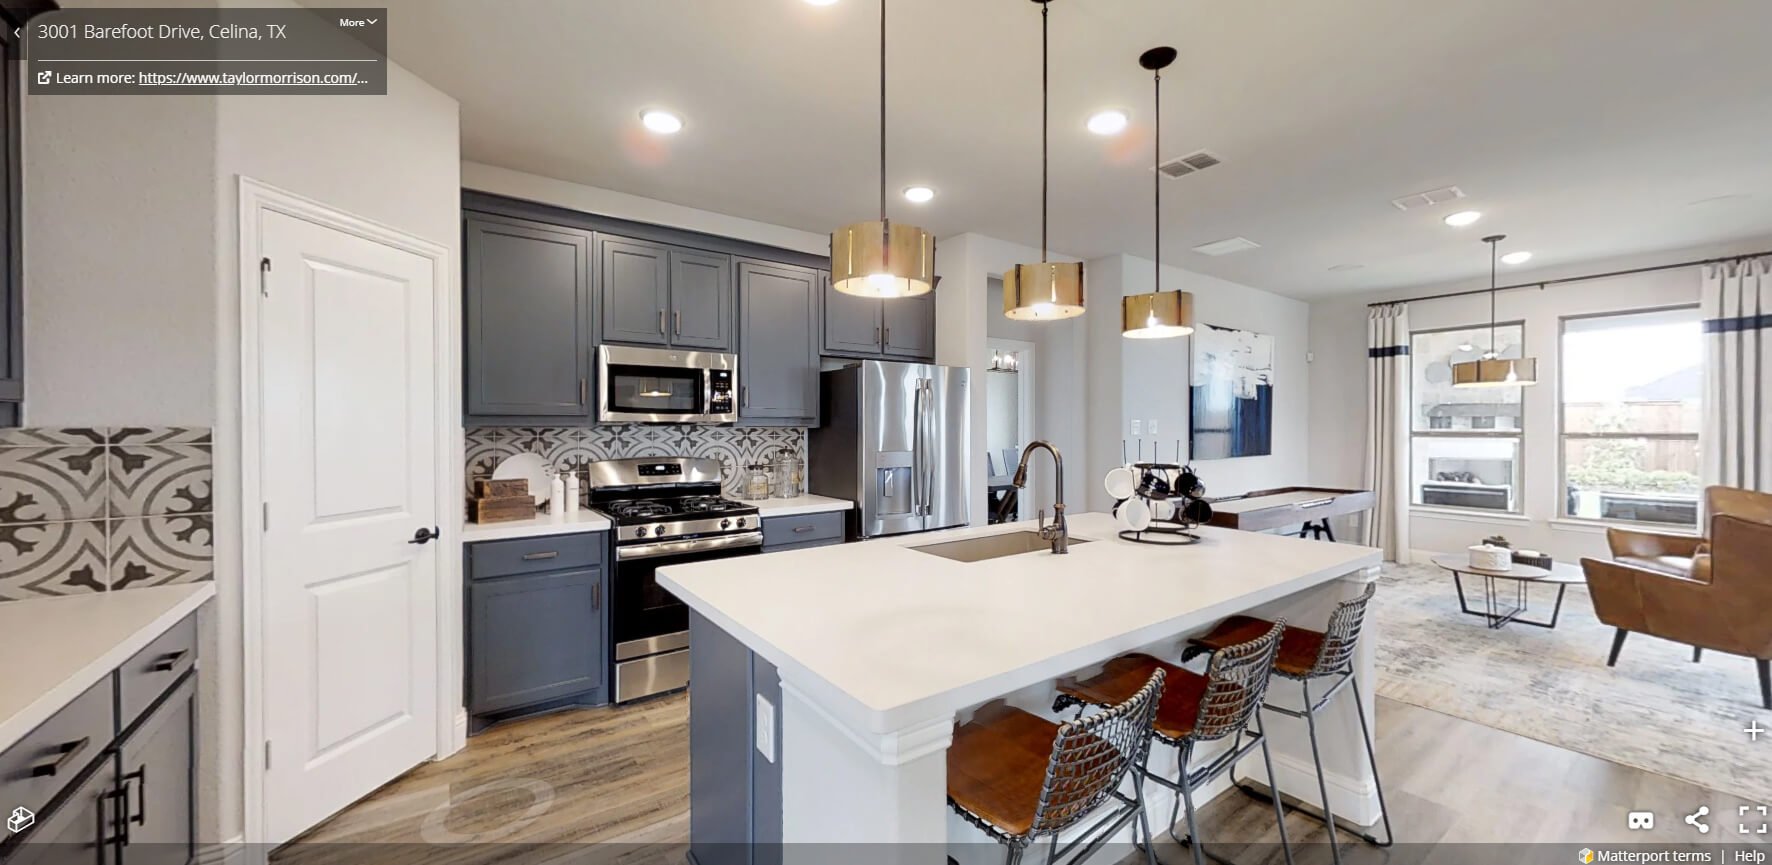 Click Image to View a Virtual Tour of the Sweetwater Model Home